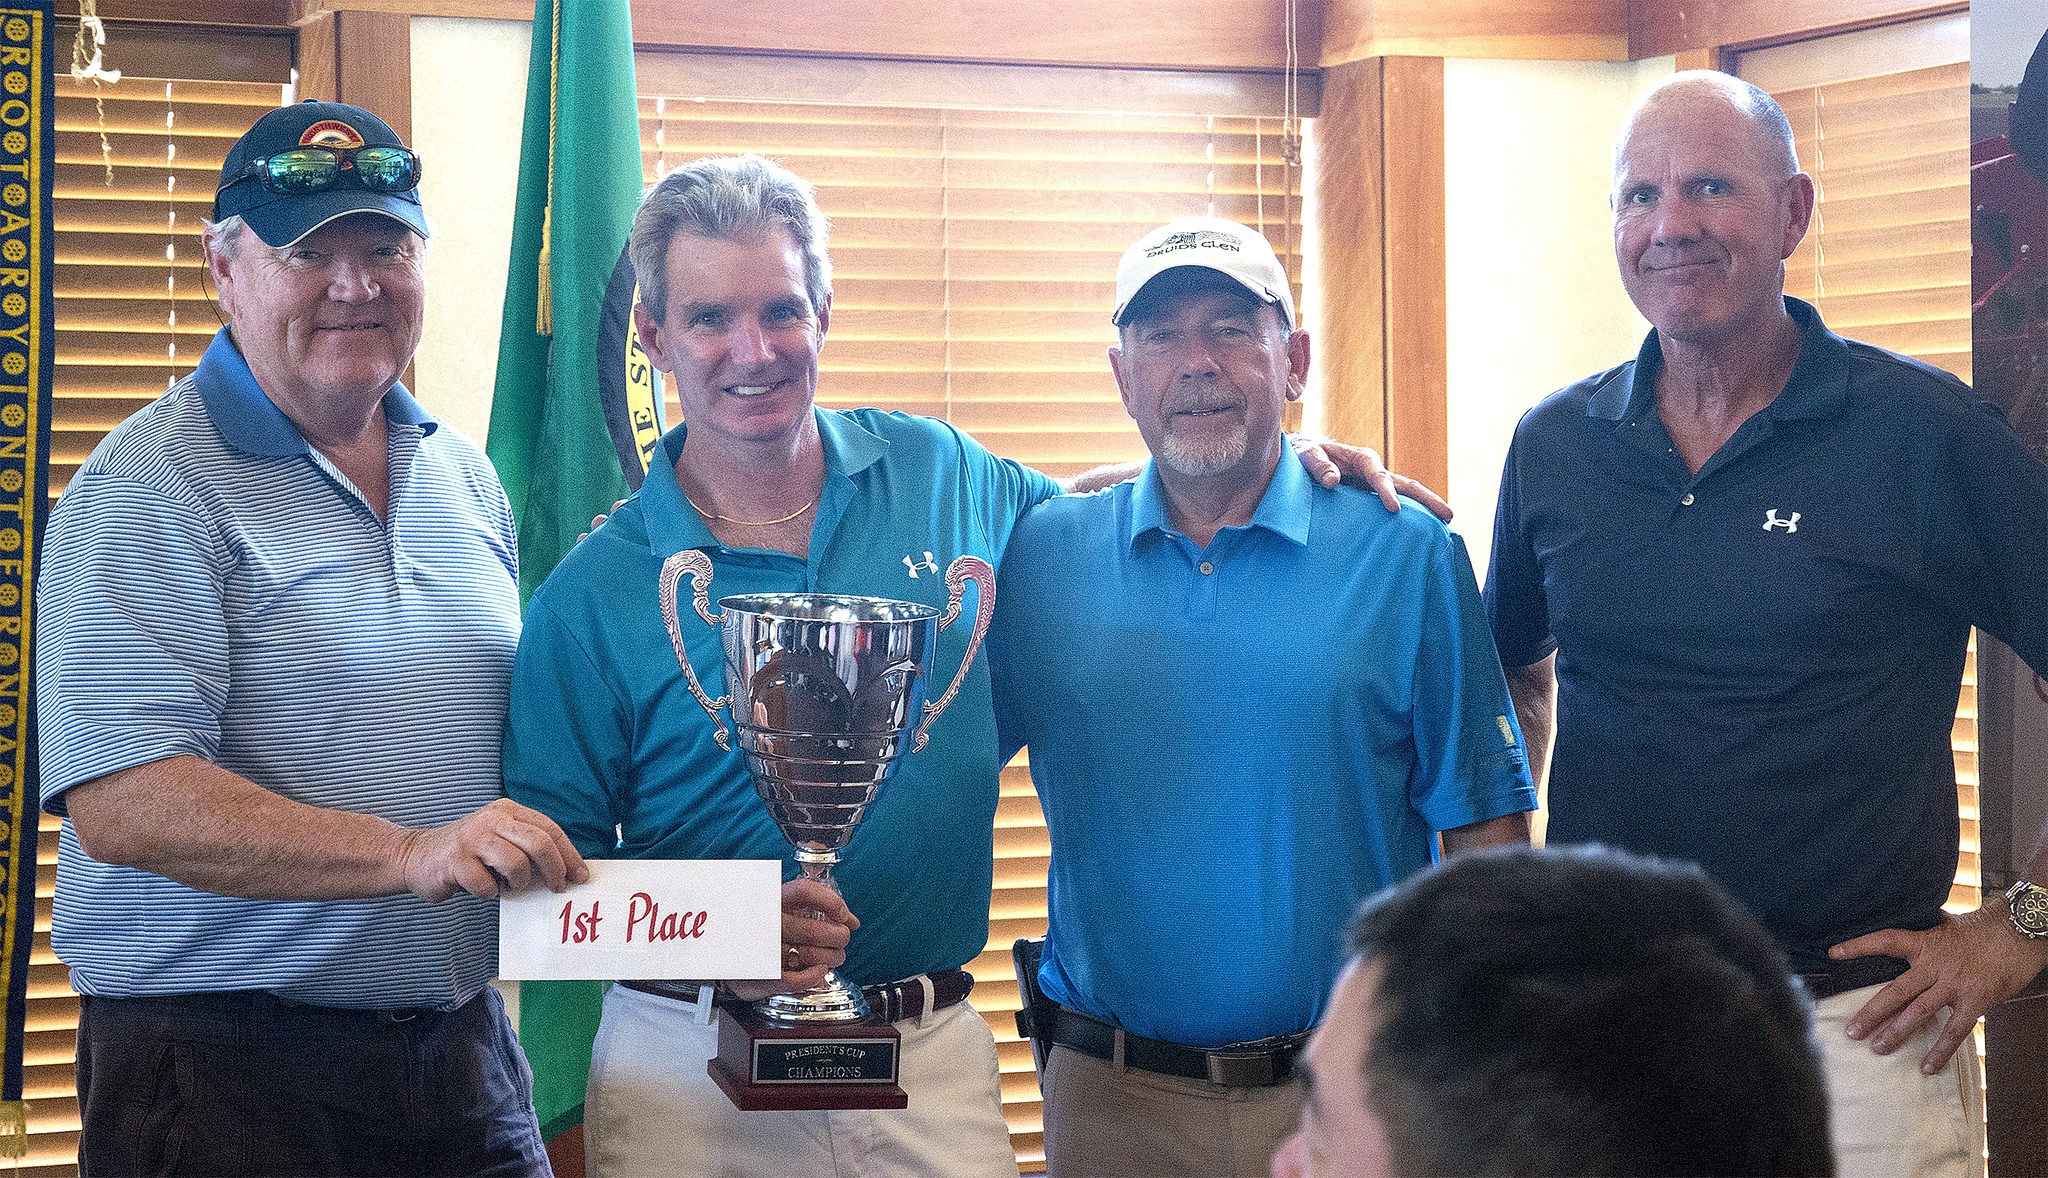 Taking first place in the June 27 Rotary Presidents Cup golf tournament are